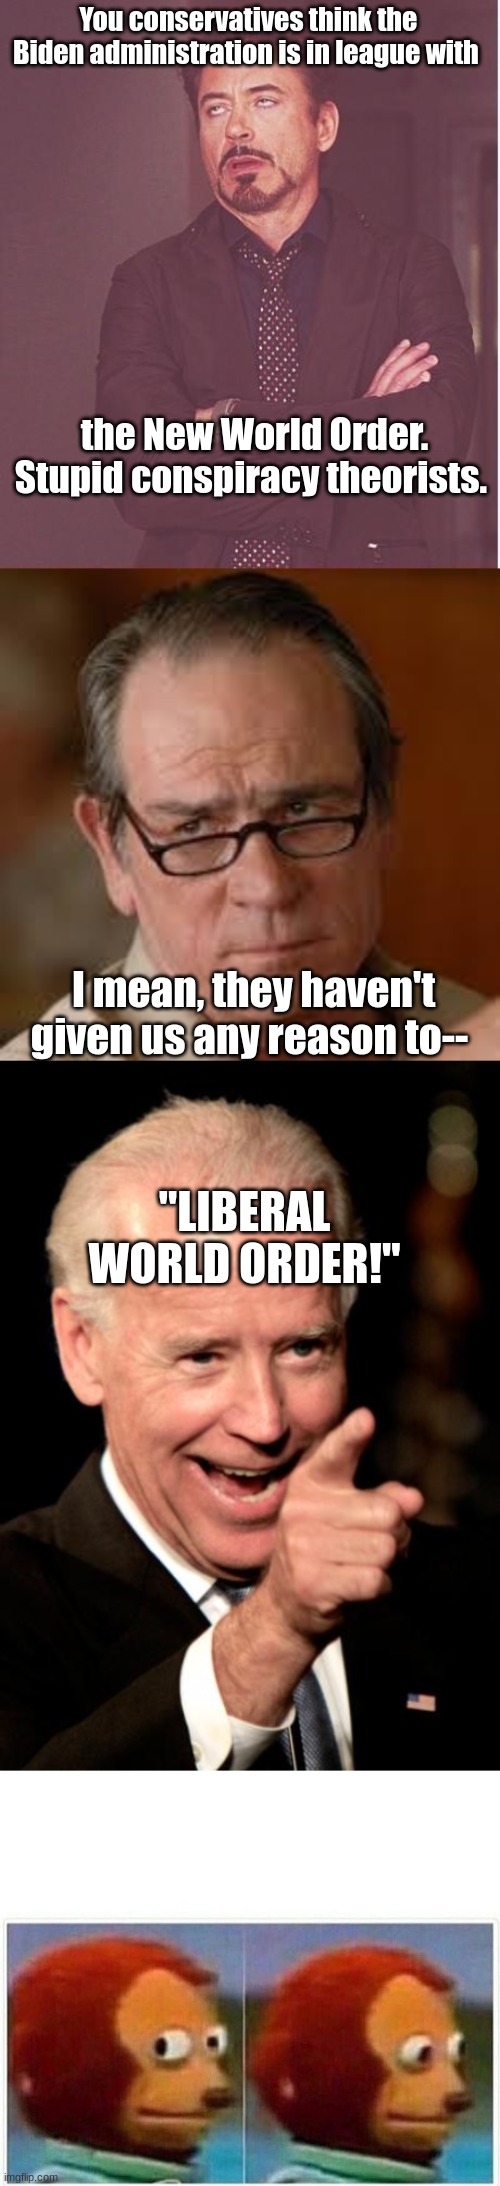 It's not as if he said---oh...he did.*im out of conspiracy theories at this point* | You conservatives think the Biden administration is in league with; the New World Order. Stupid conspiracy theorists. I mean, they haven't given us any reason to--; "LIBERAL WORLD ORDER!" | image tagged in memes,face you make robert downey jr,my face when someone asks a stupid question,smilin biden,monkey puppet | made w/ Imgflip meme maker